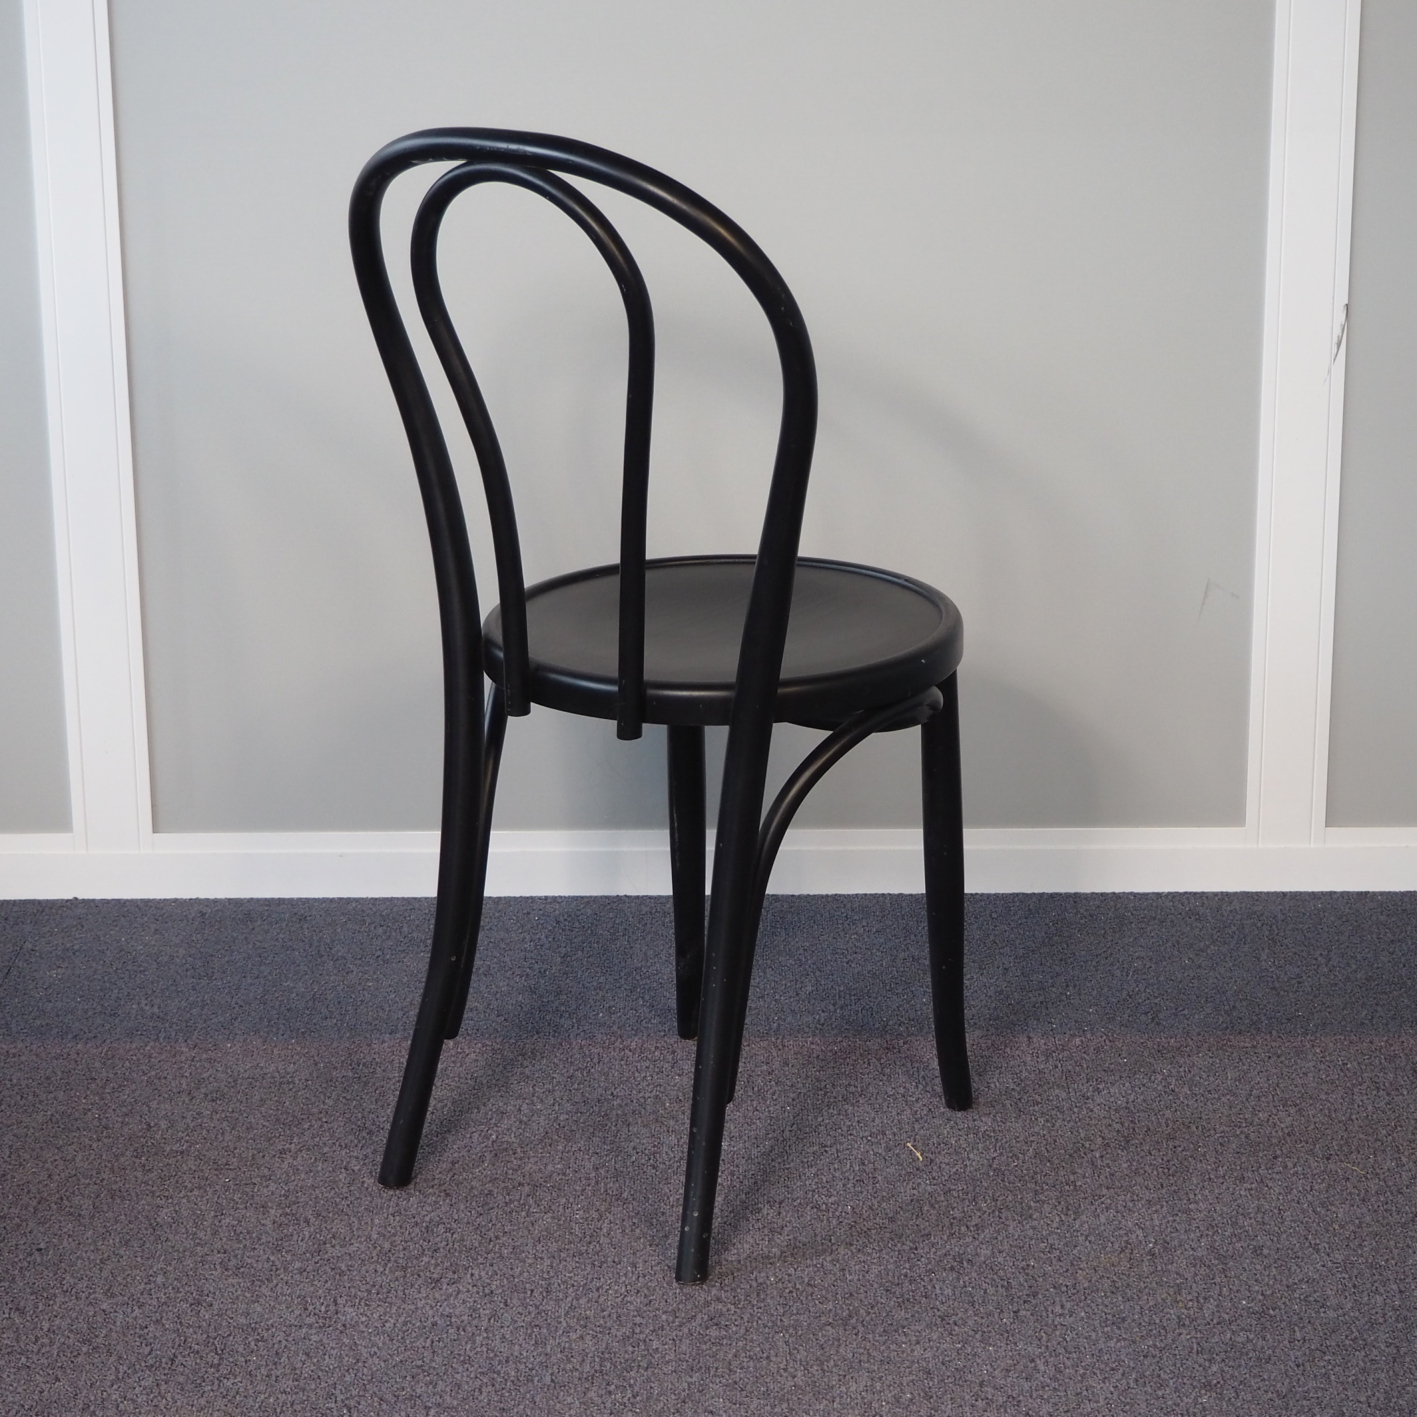 Bentwood chair in black painted wood